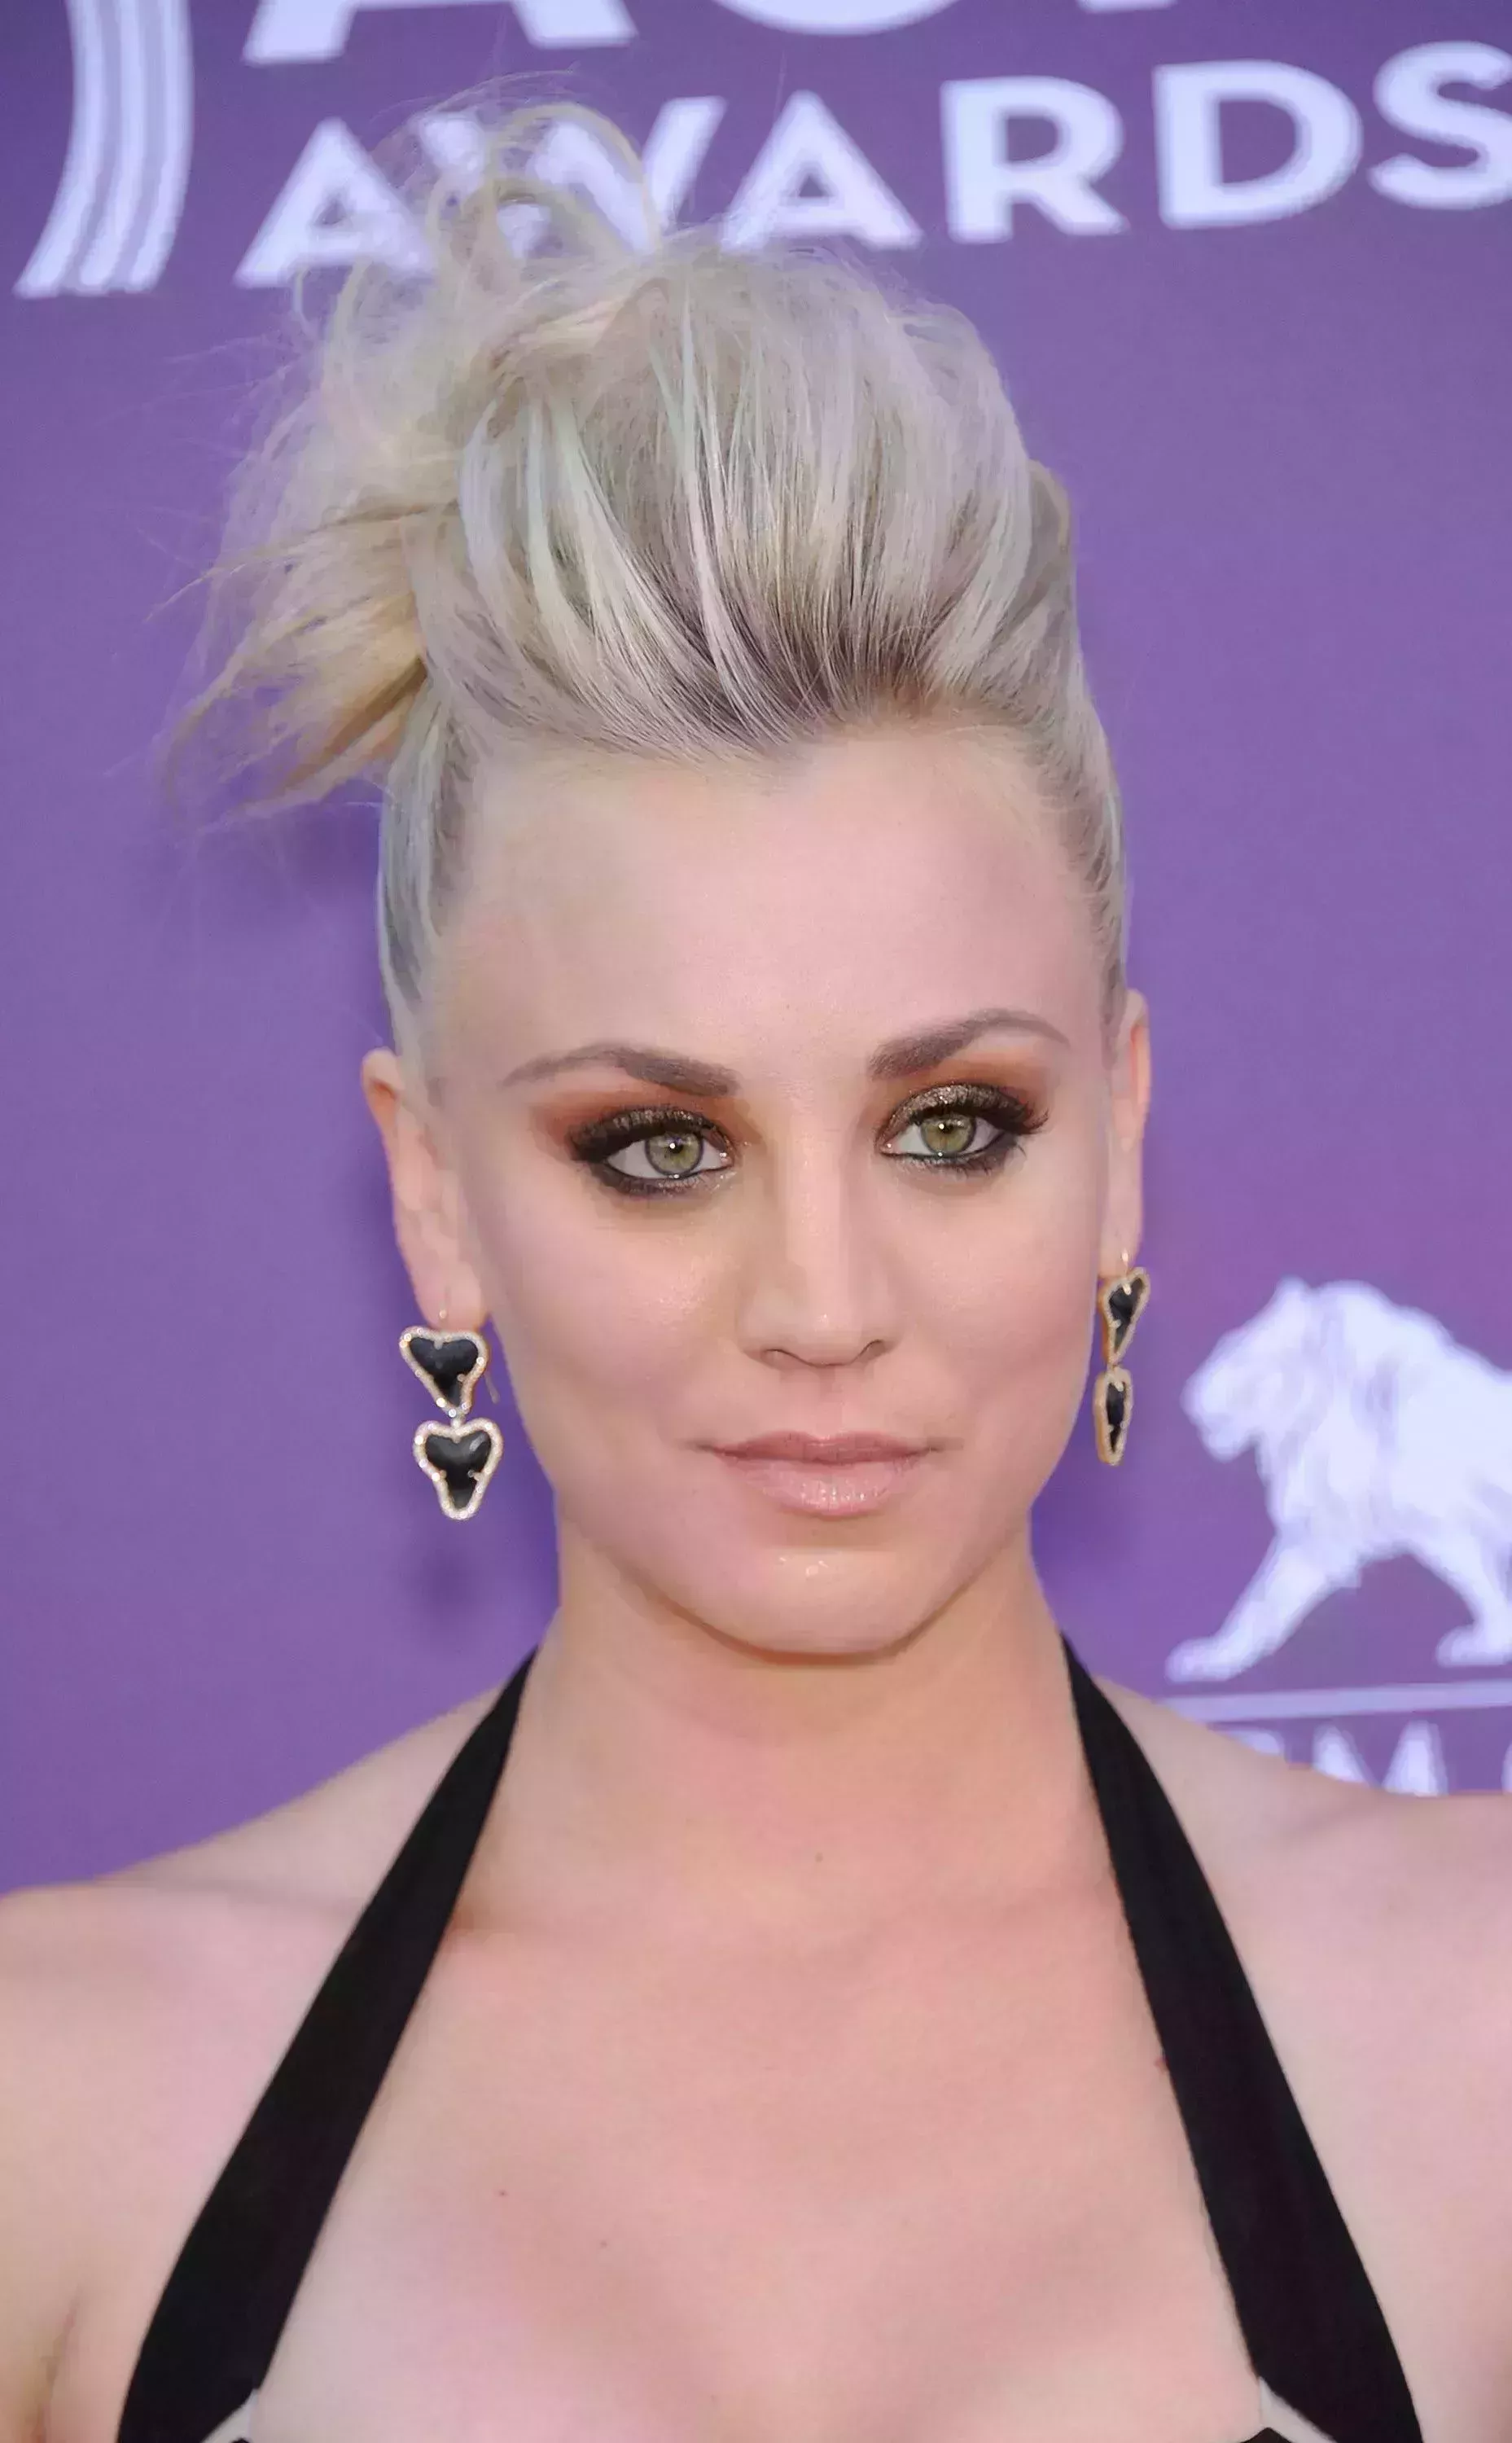 Kaley Cuoco’s Mohawk Inspired Updo Hairstyle